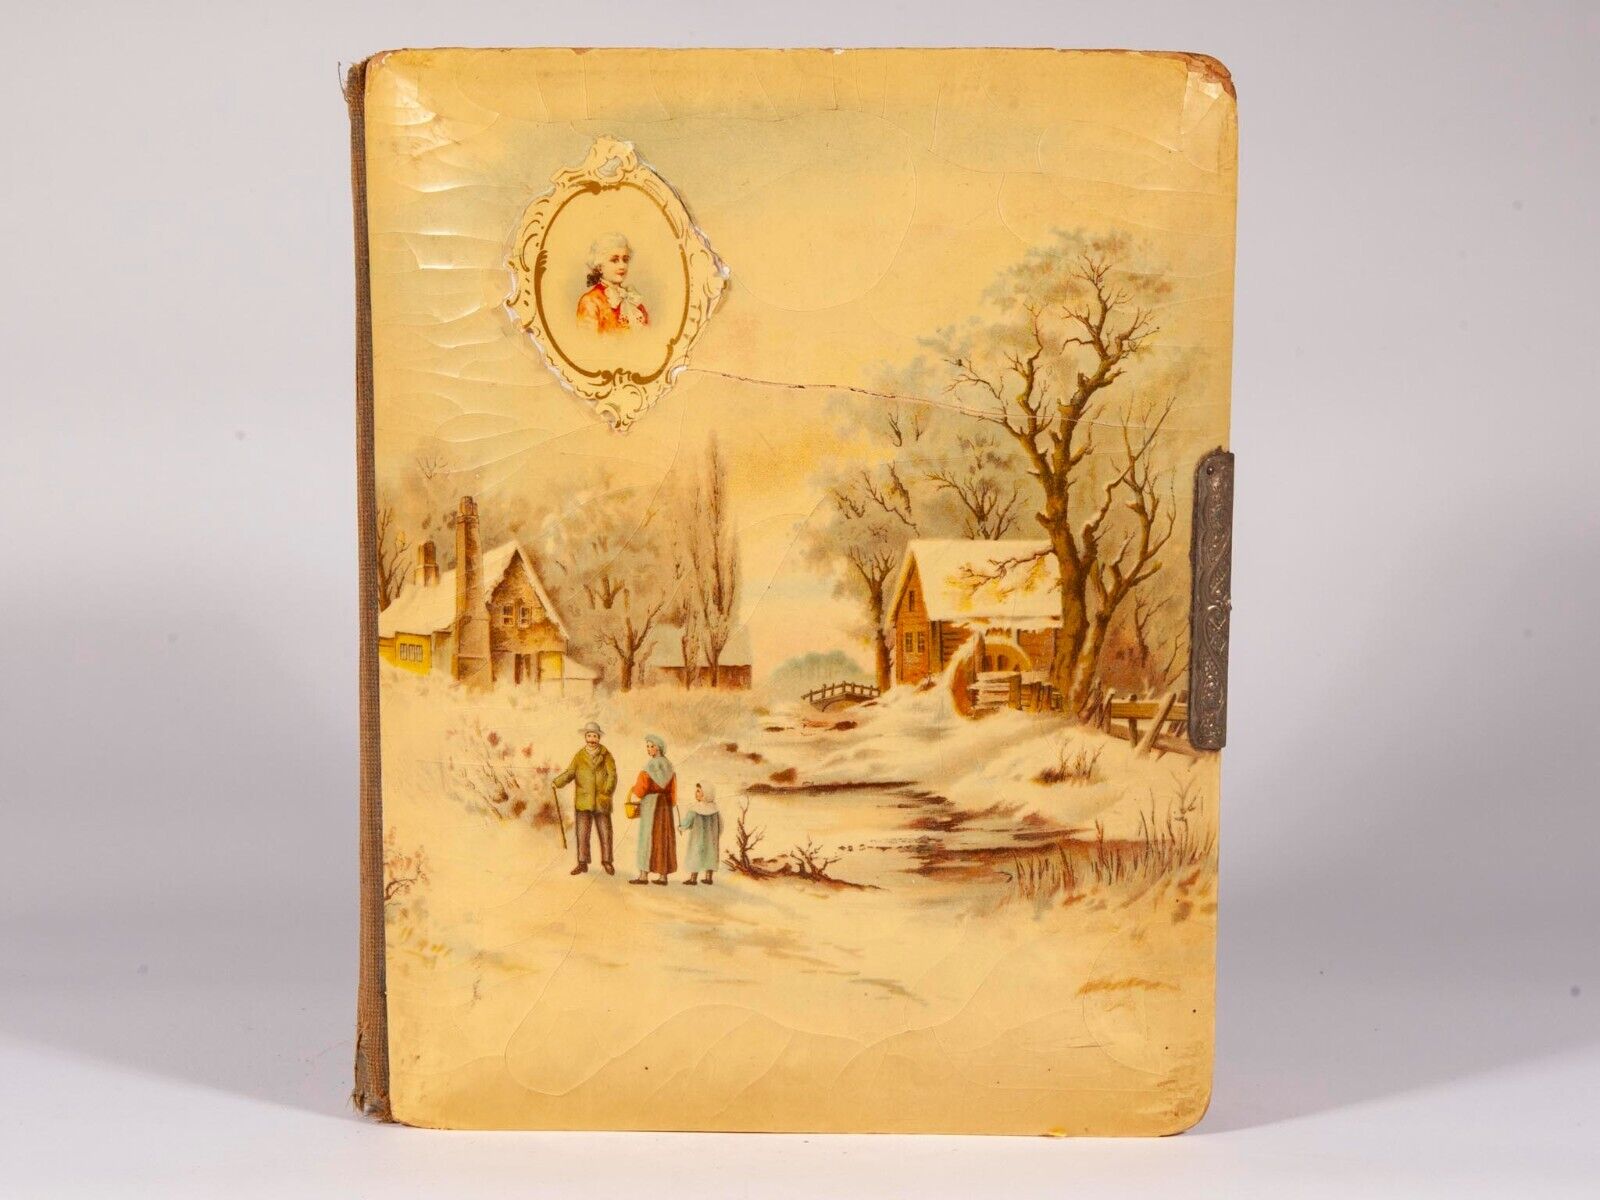 Antique Vintage Celluloid Photo Album - Family Coming Home in Snow